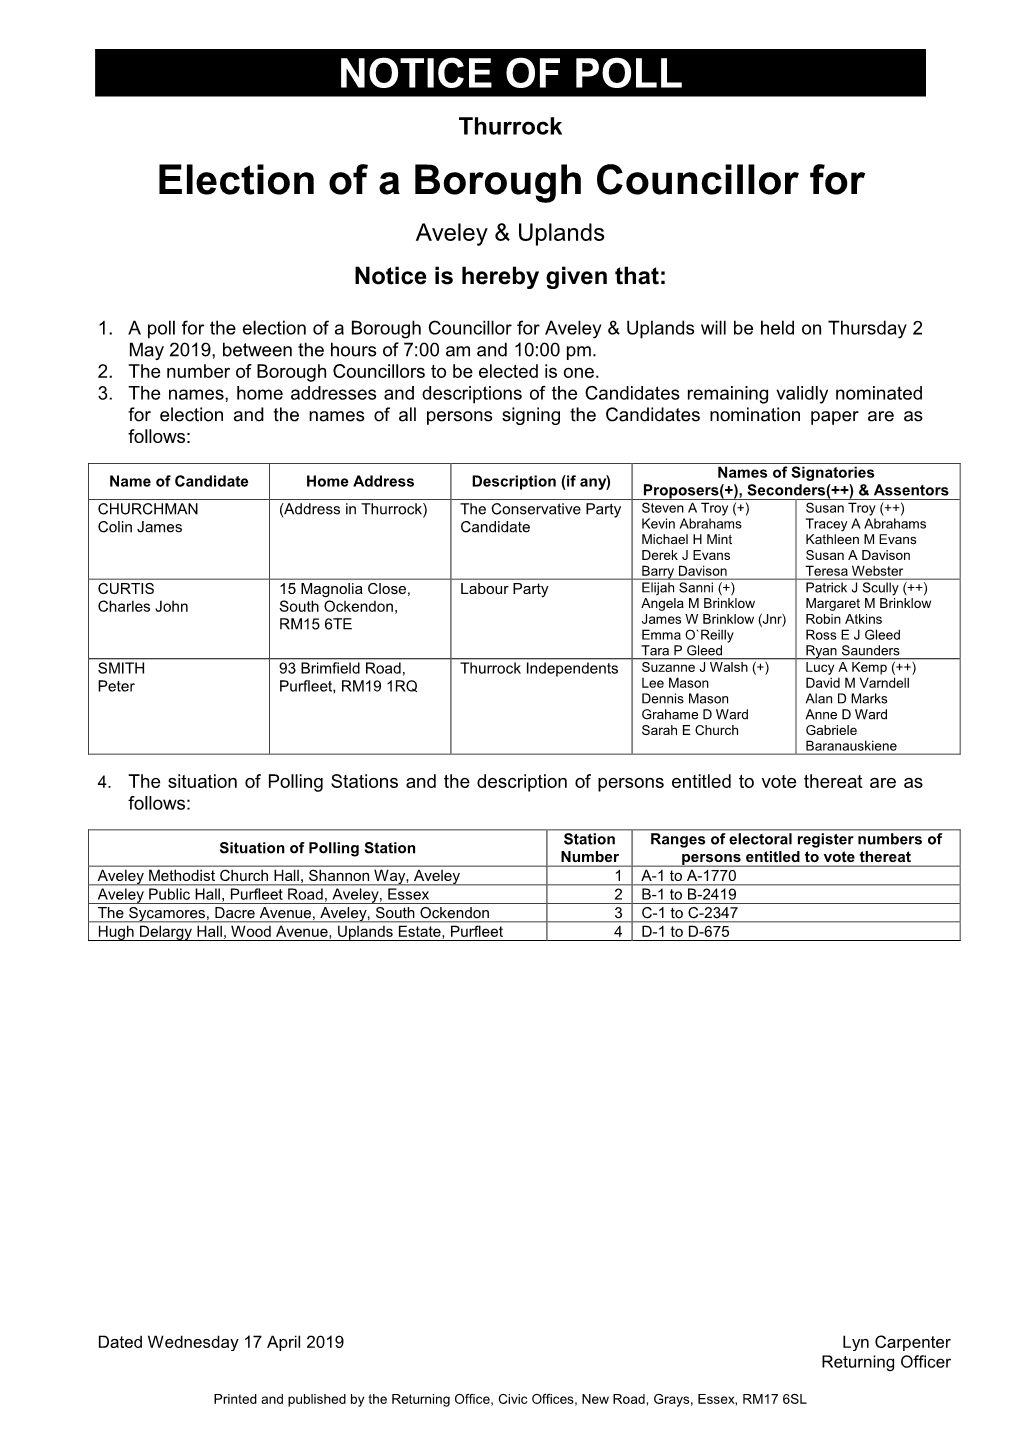 Notice of Poll and Situation of Polling Stations, Council Elections, 2 May